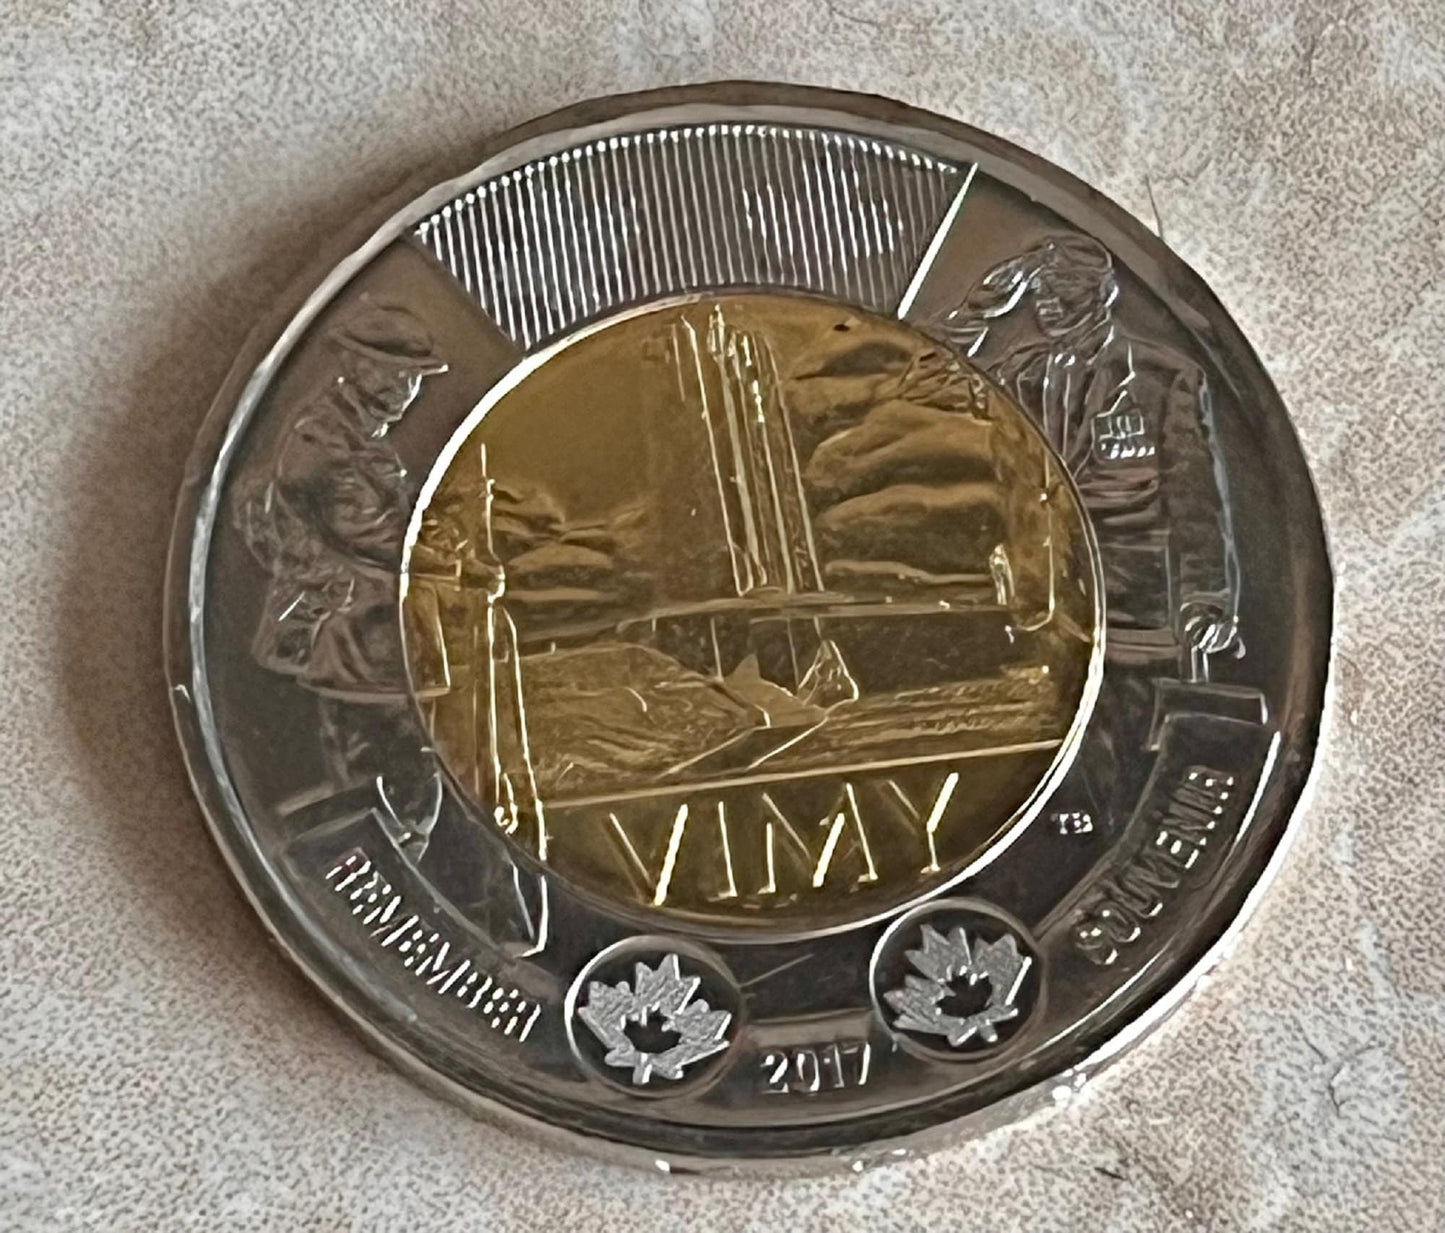 Vimy Ridge Coin Ring 2017 Canadian 2 Dollar Handmade Personal Jewelry Ring Gift For Friend Coin Ring Gift For Him Her World Coin Collector